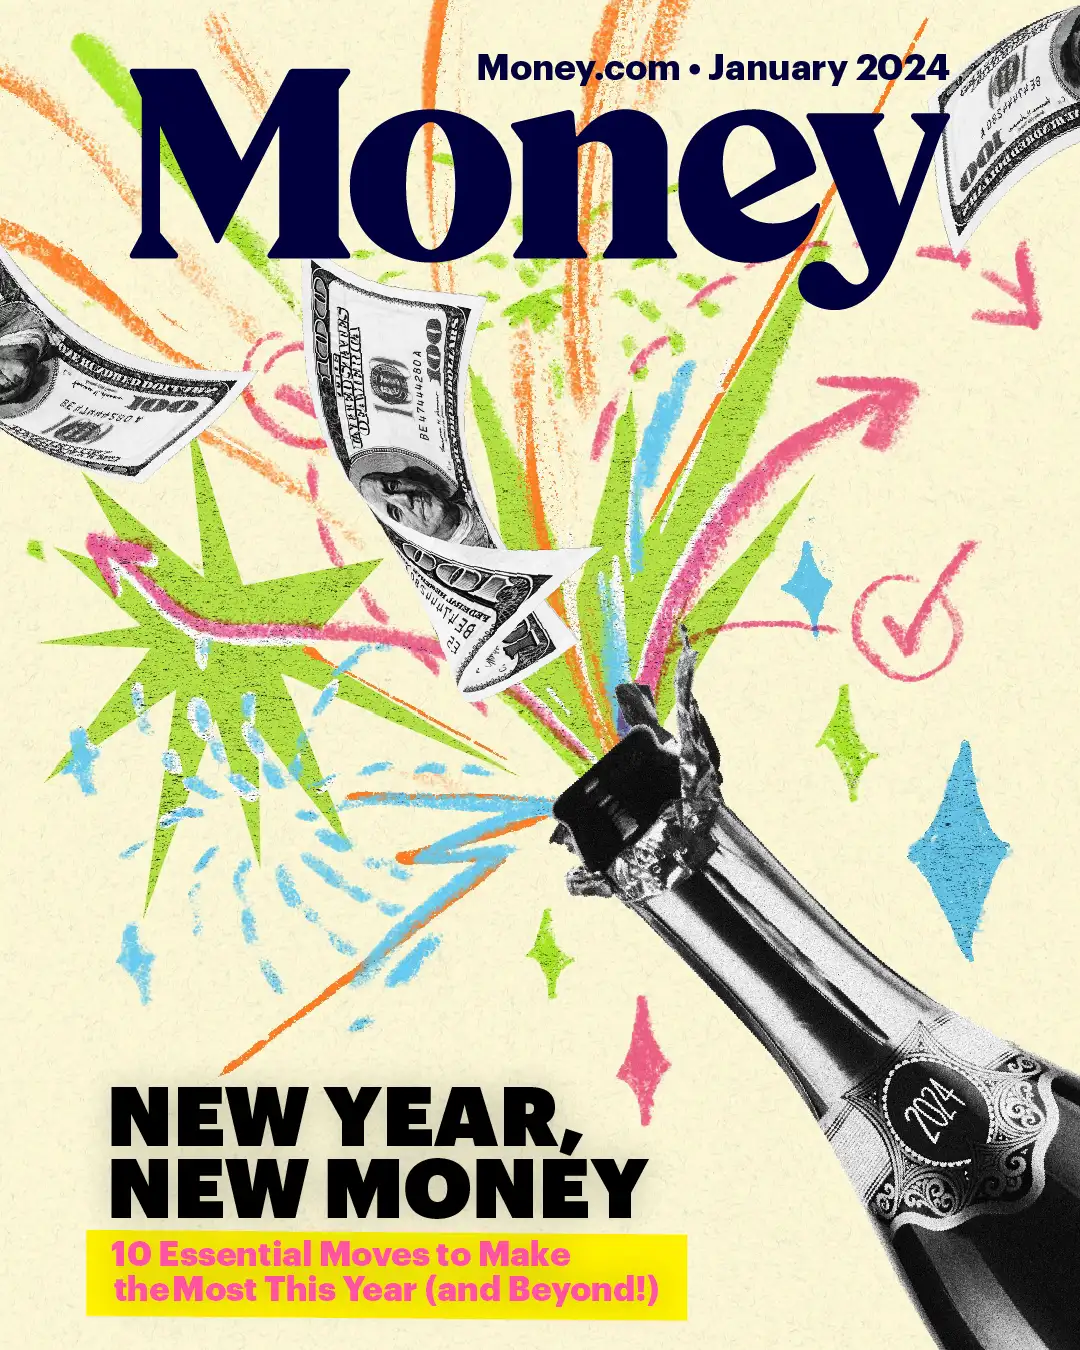 Money cover featuring an illustration of a bottle of champagne exploding into colorful hand drawn fireworks and strategic moves, alongside with dollar bills